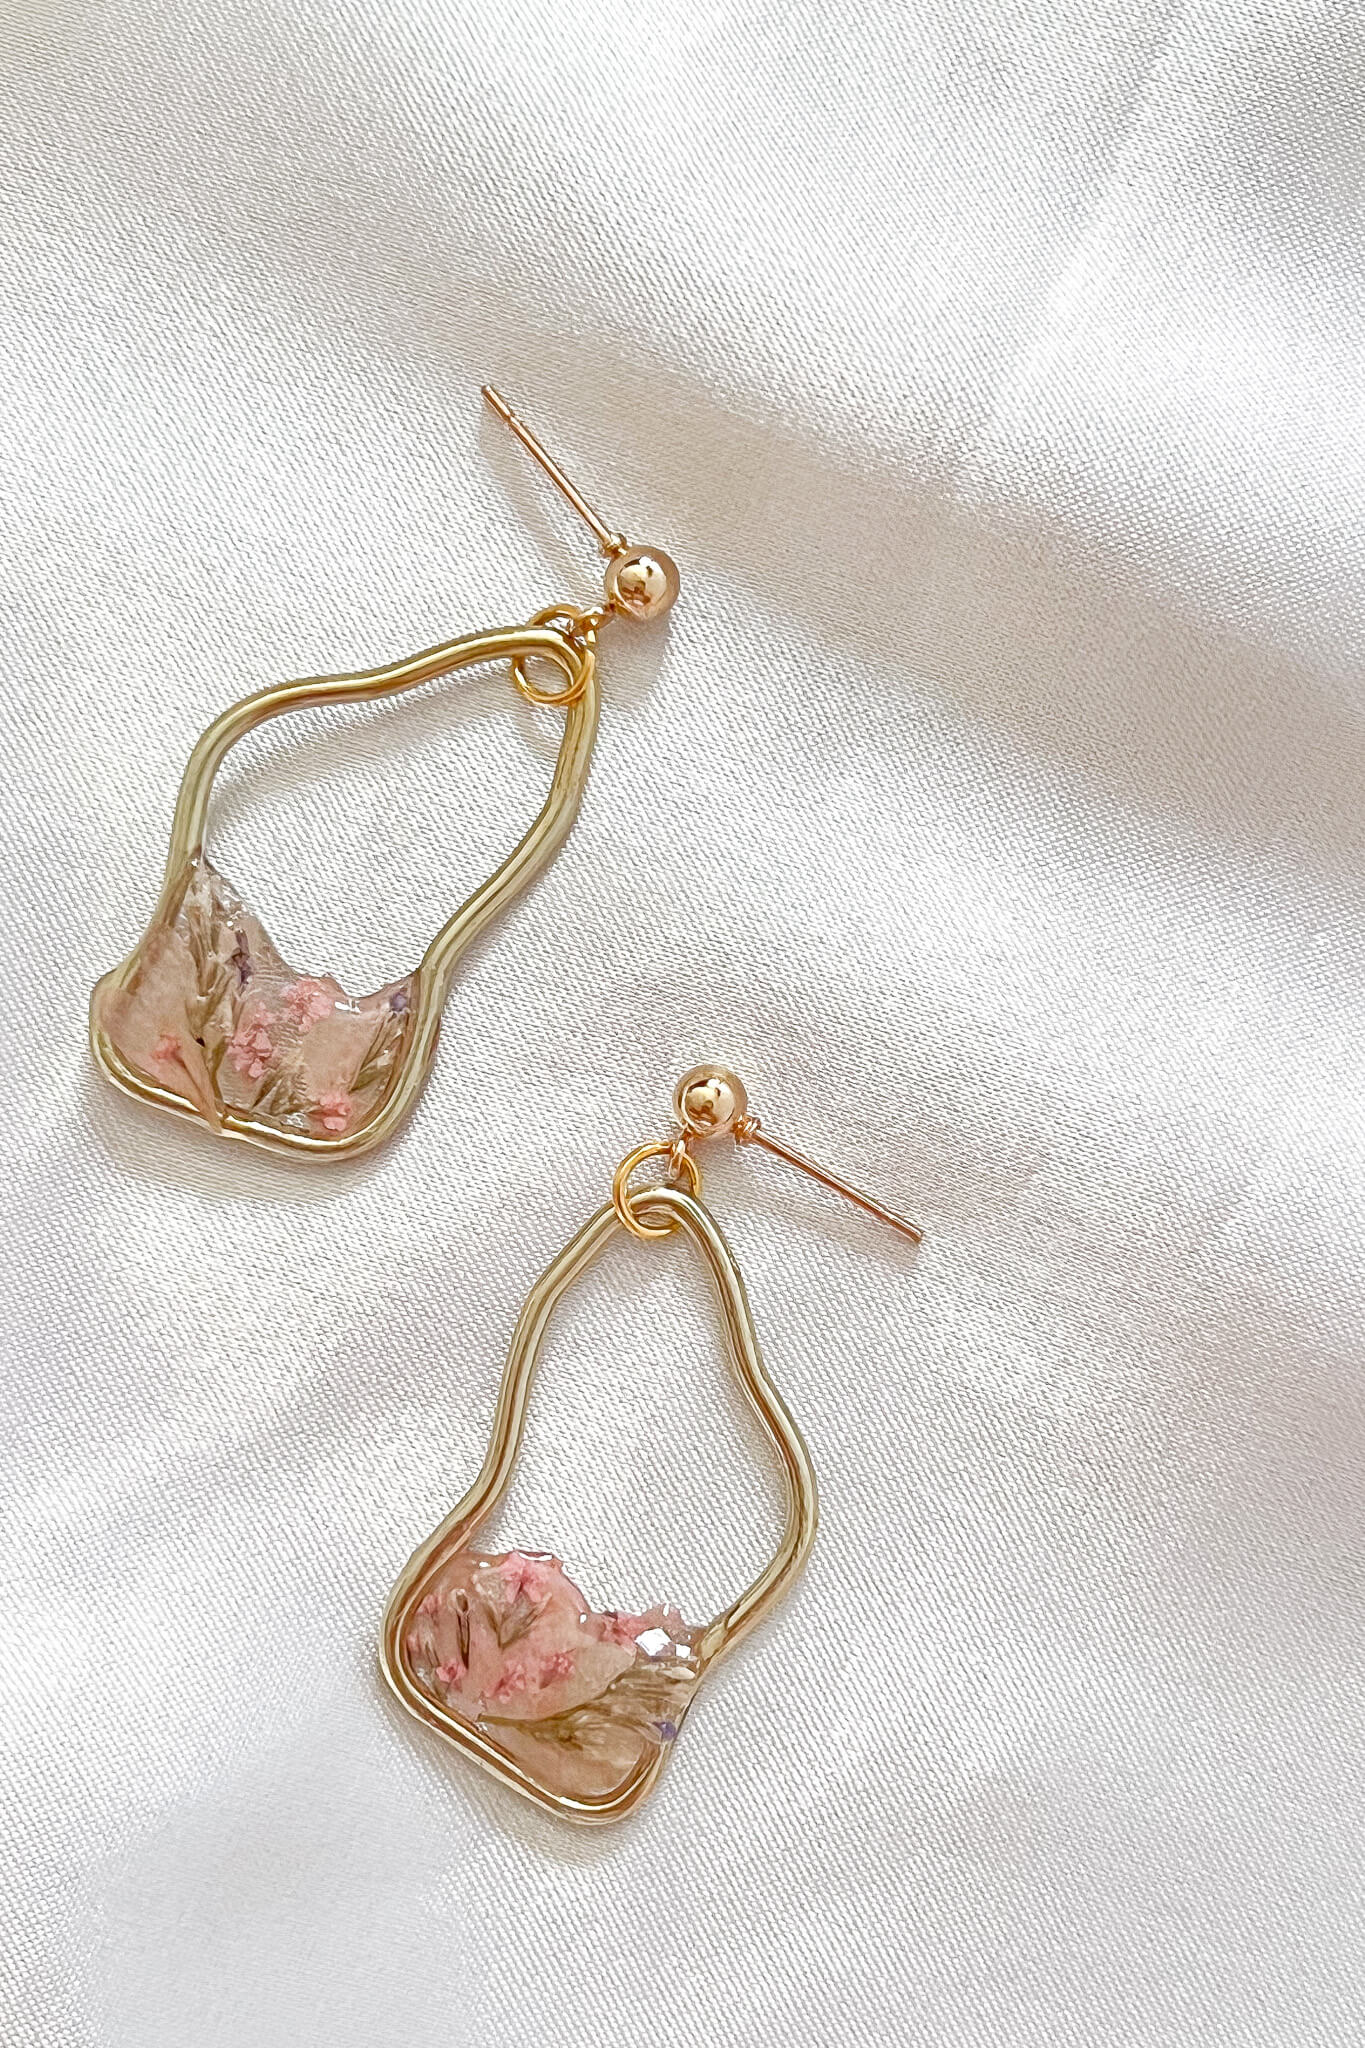 Handmade resin dangle earrings with gold hardware and dried flowers